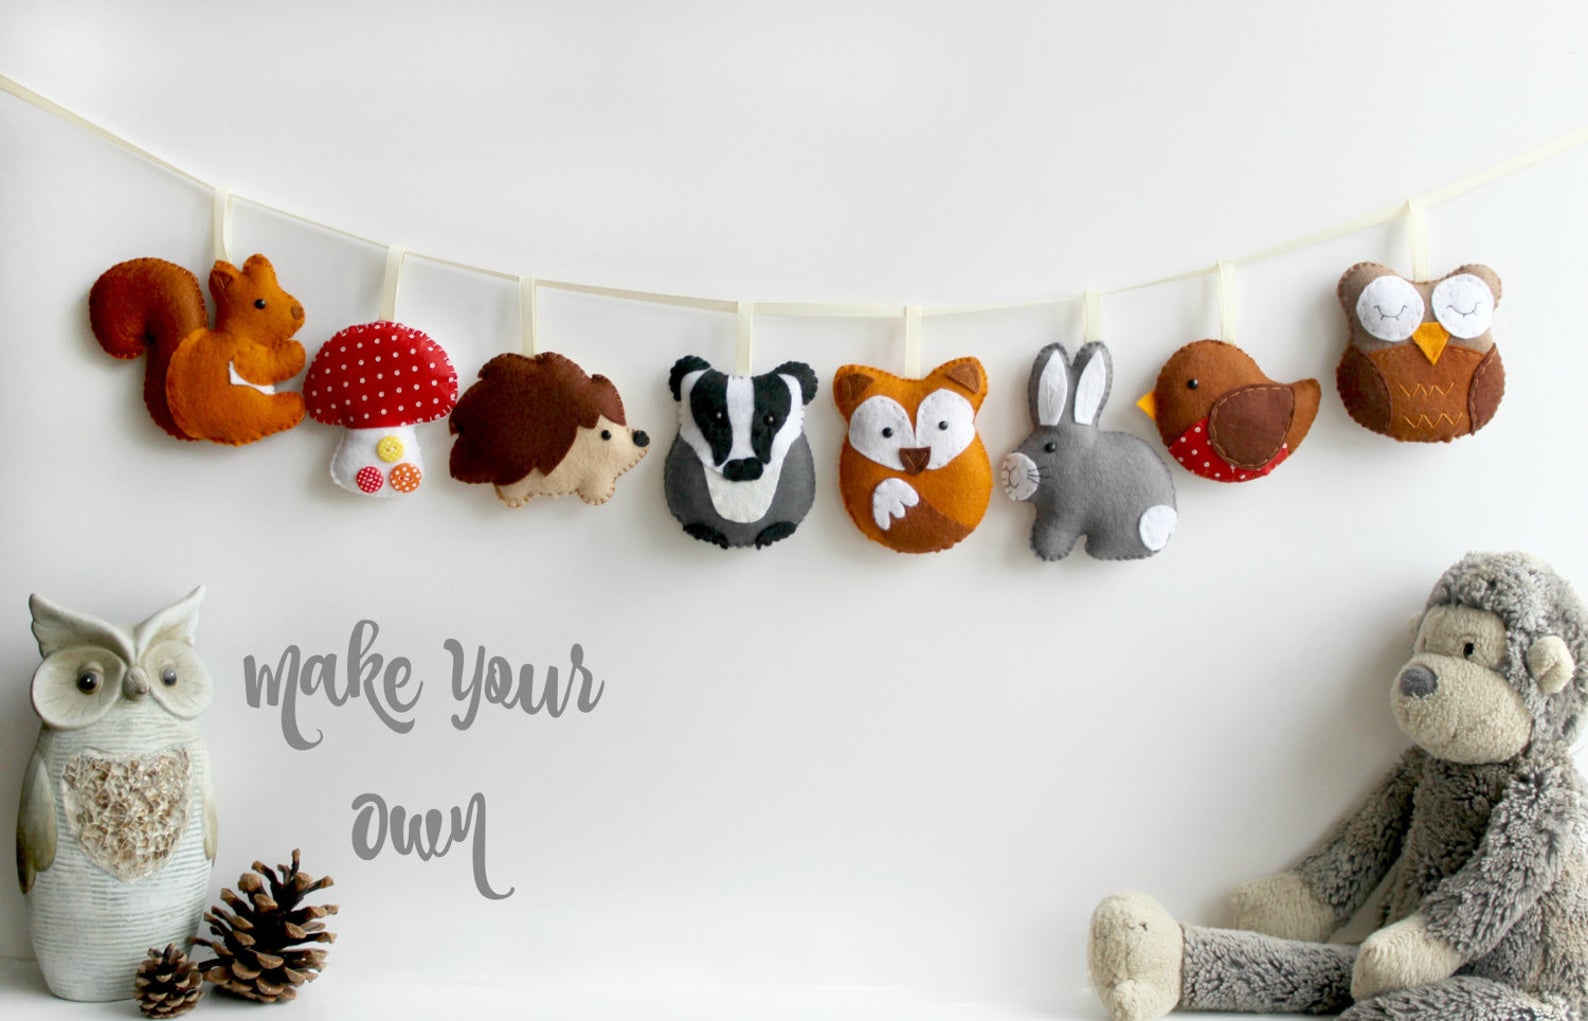 You are currently viewing Make Your Own Crafts with Awesome Kits that are Made by Creative Etsy Artists